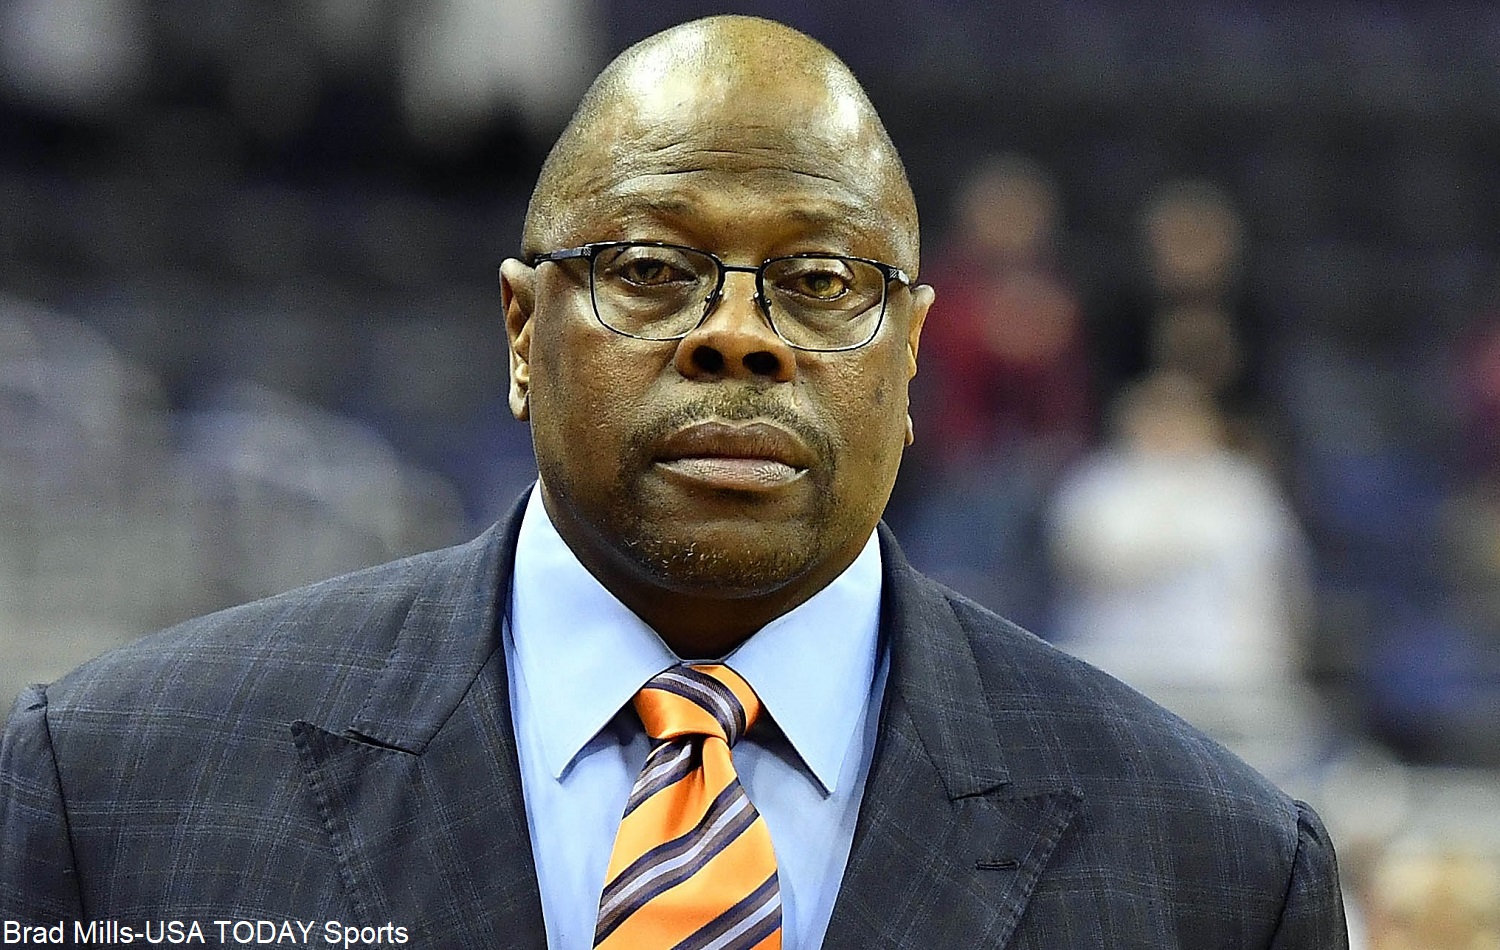 Patrick Ewing speaks on future with Georgetown job in peril